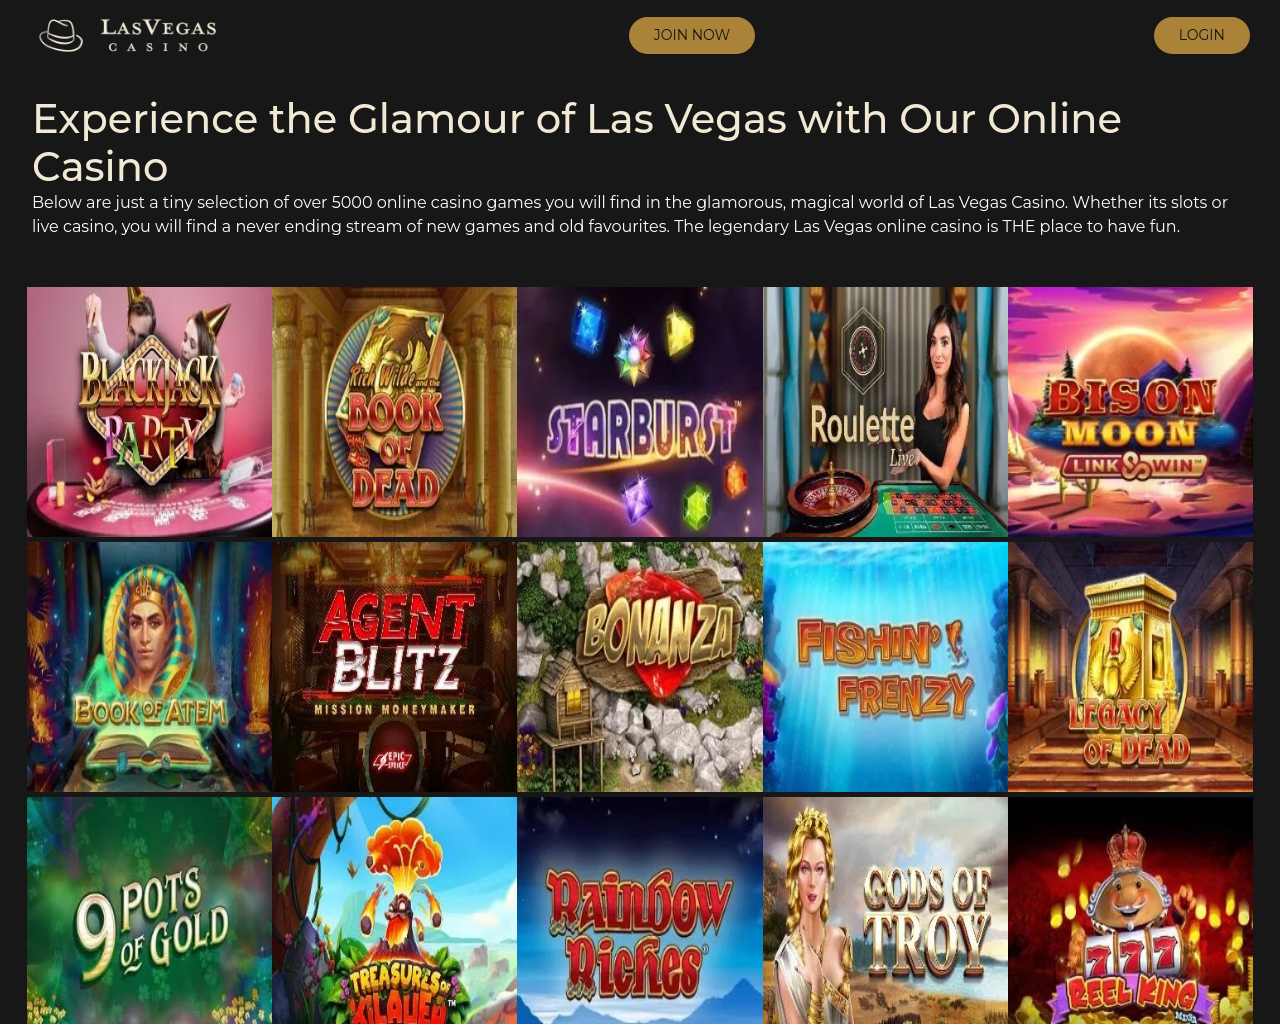 online-casino.party